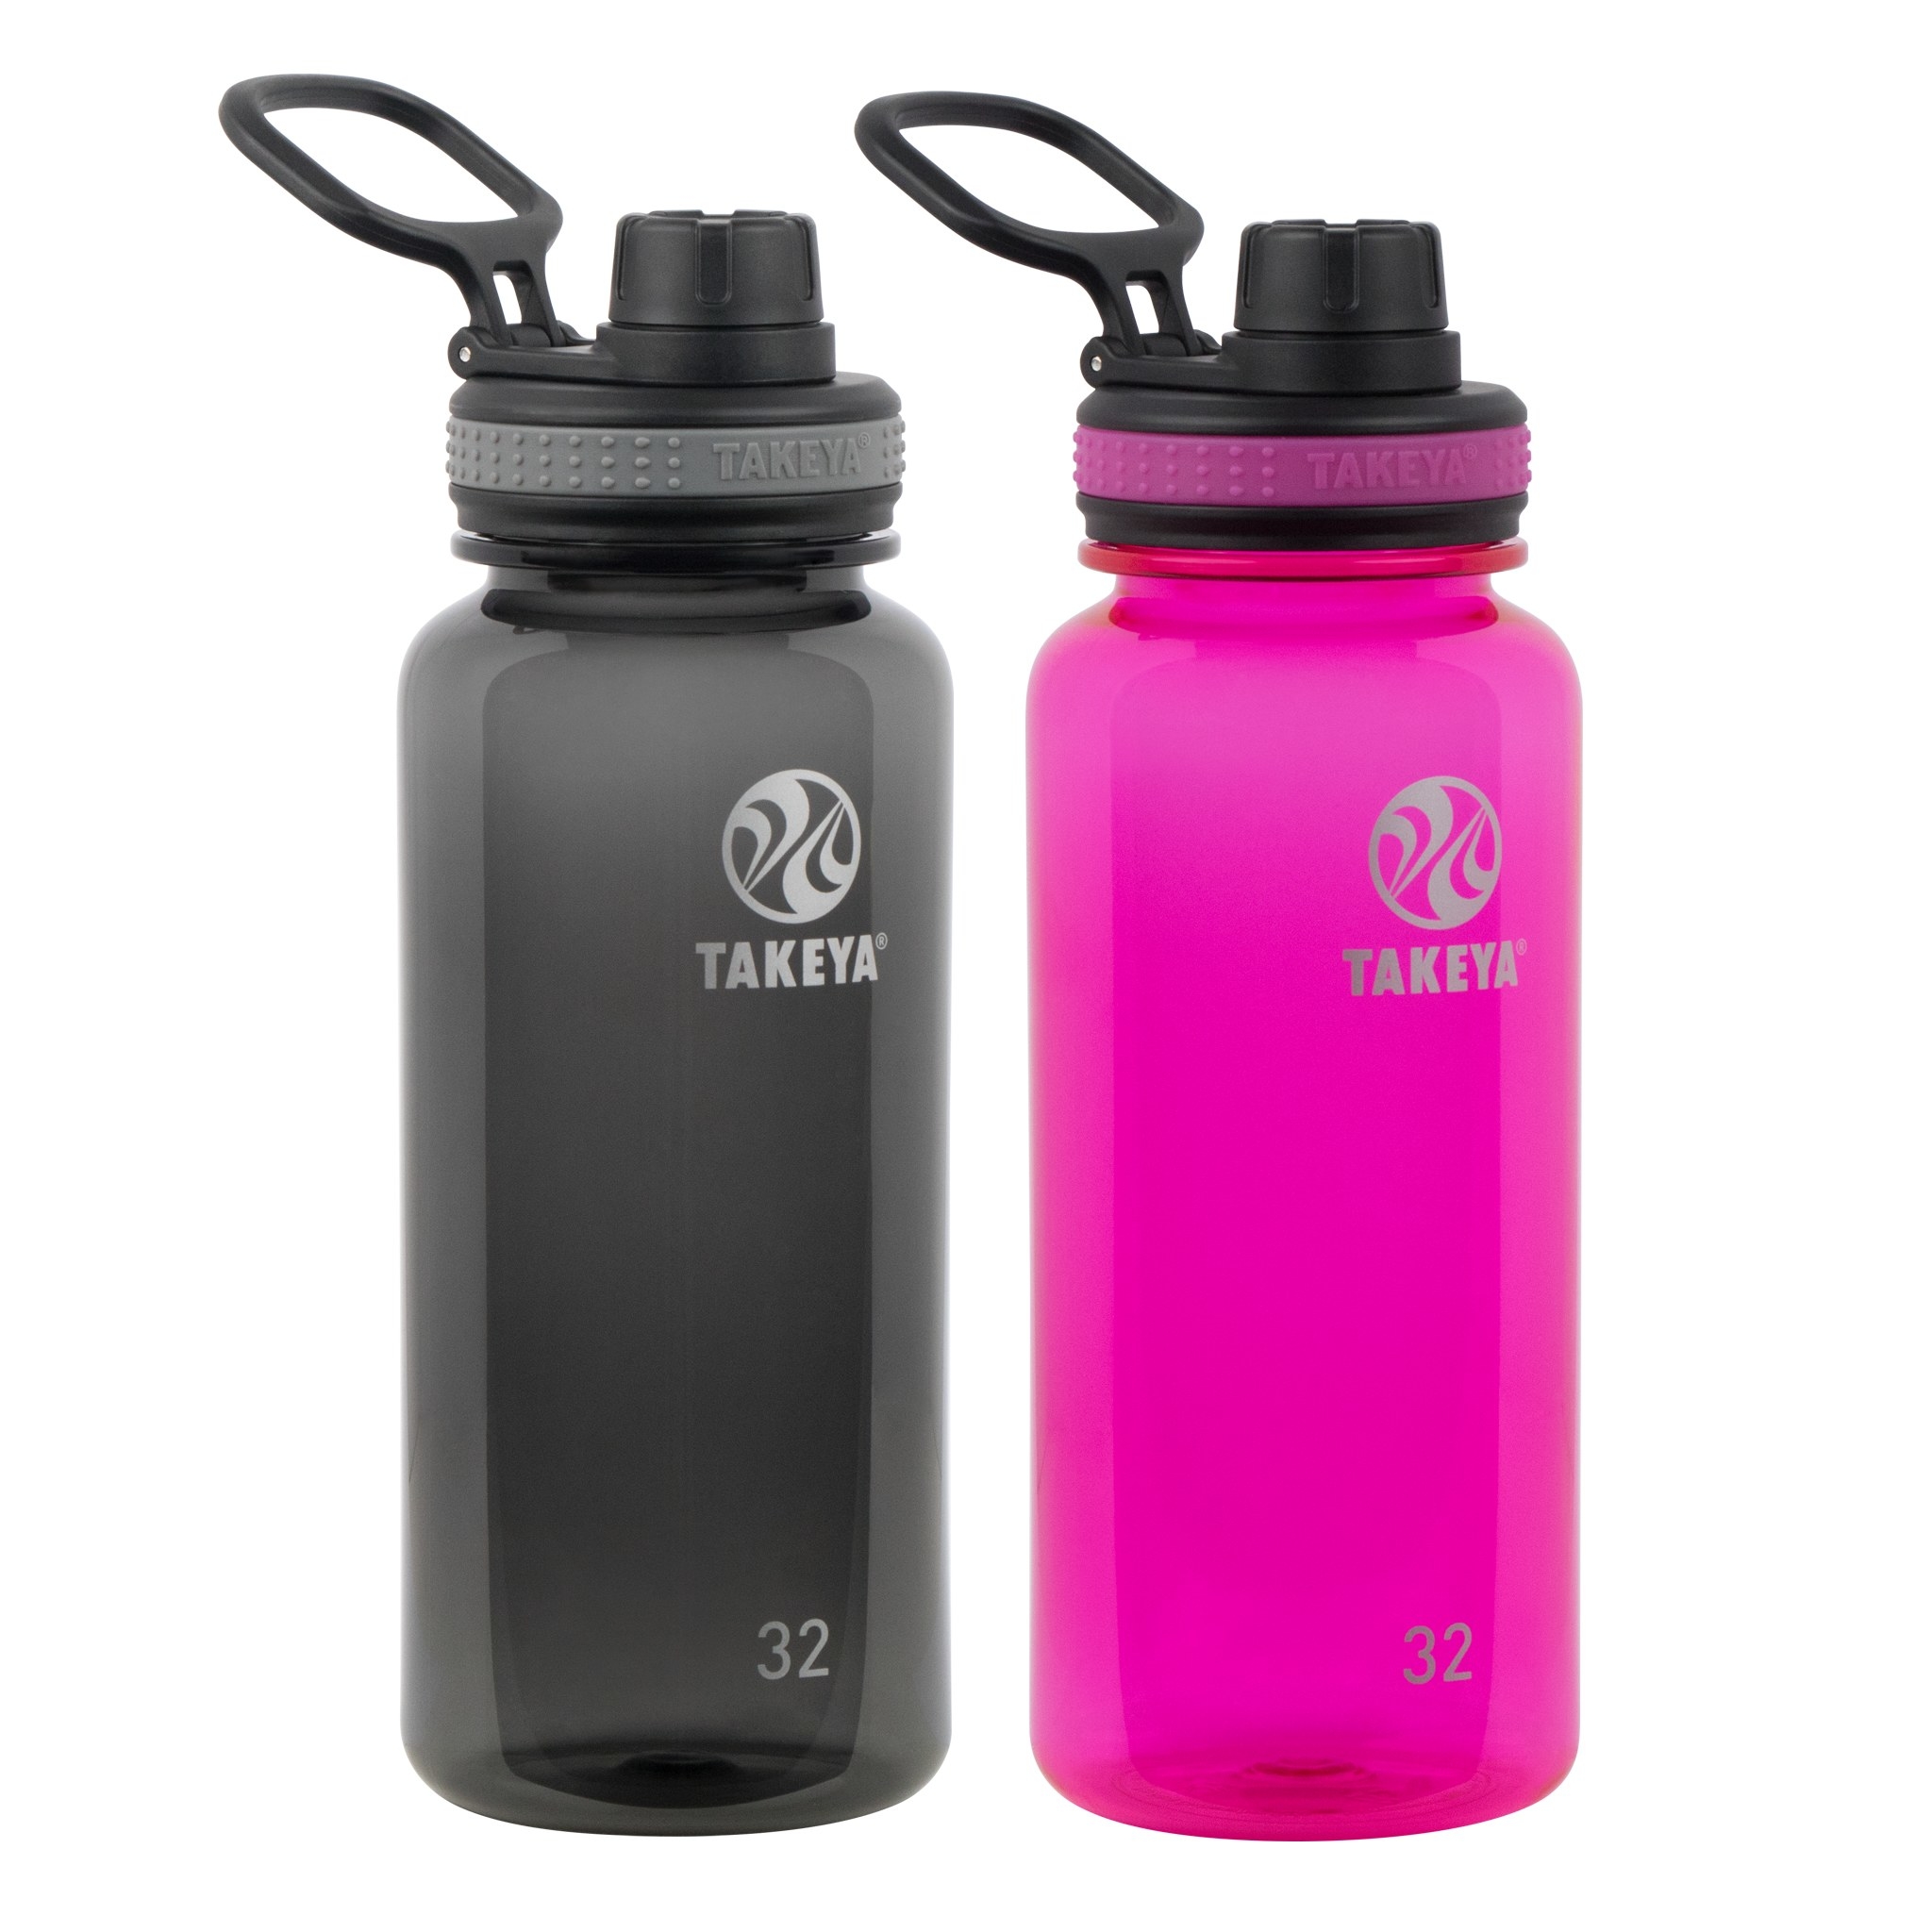 The black and pink water bottles